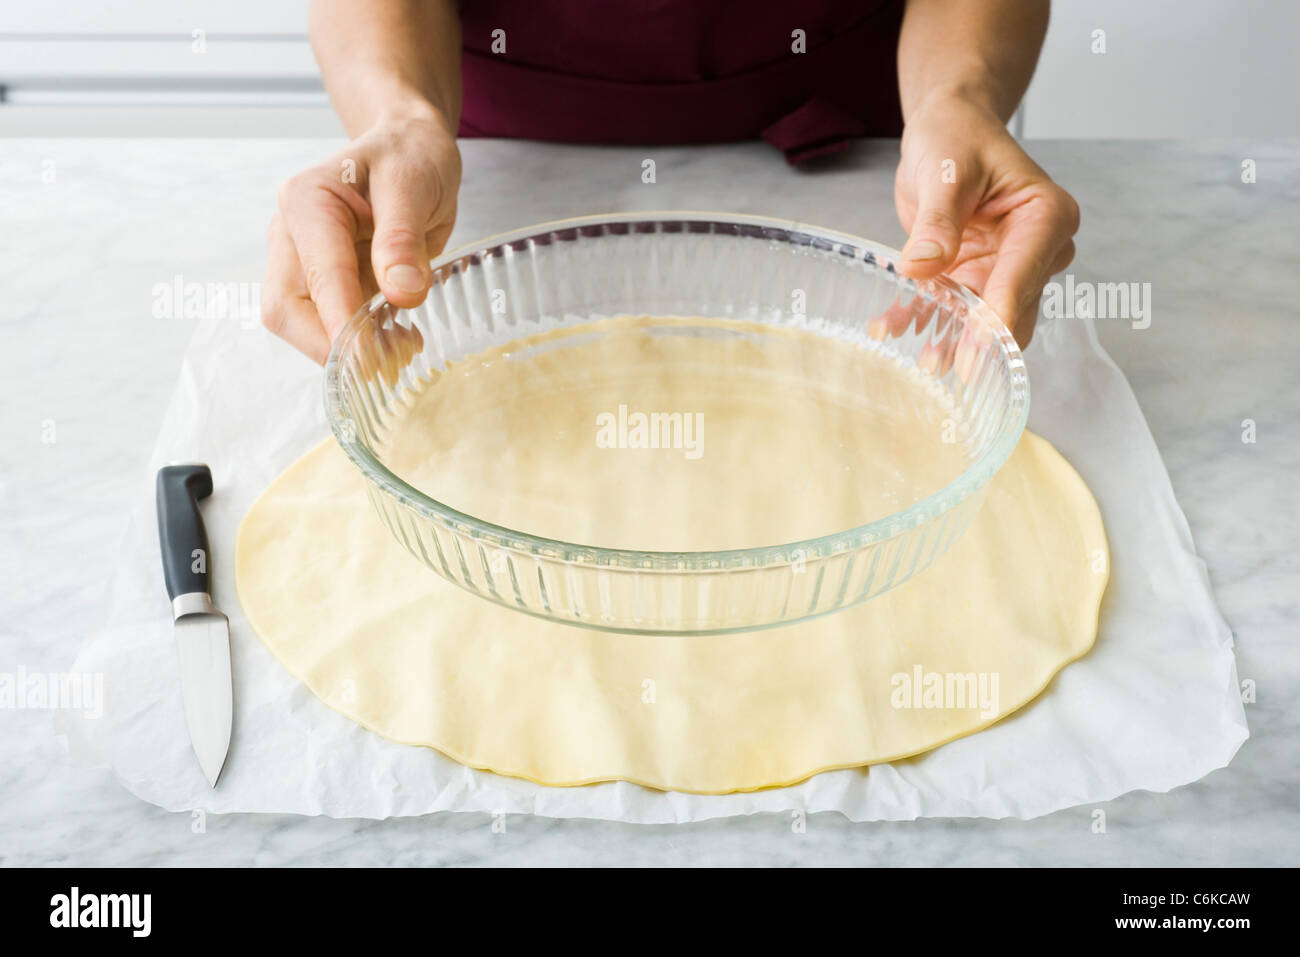 https://c8.alamy.com/comp/C6KCAW/holding-baking-pan-preparing-pastry-shell-for-baking-C6KCAW.jpg